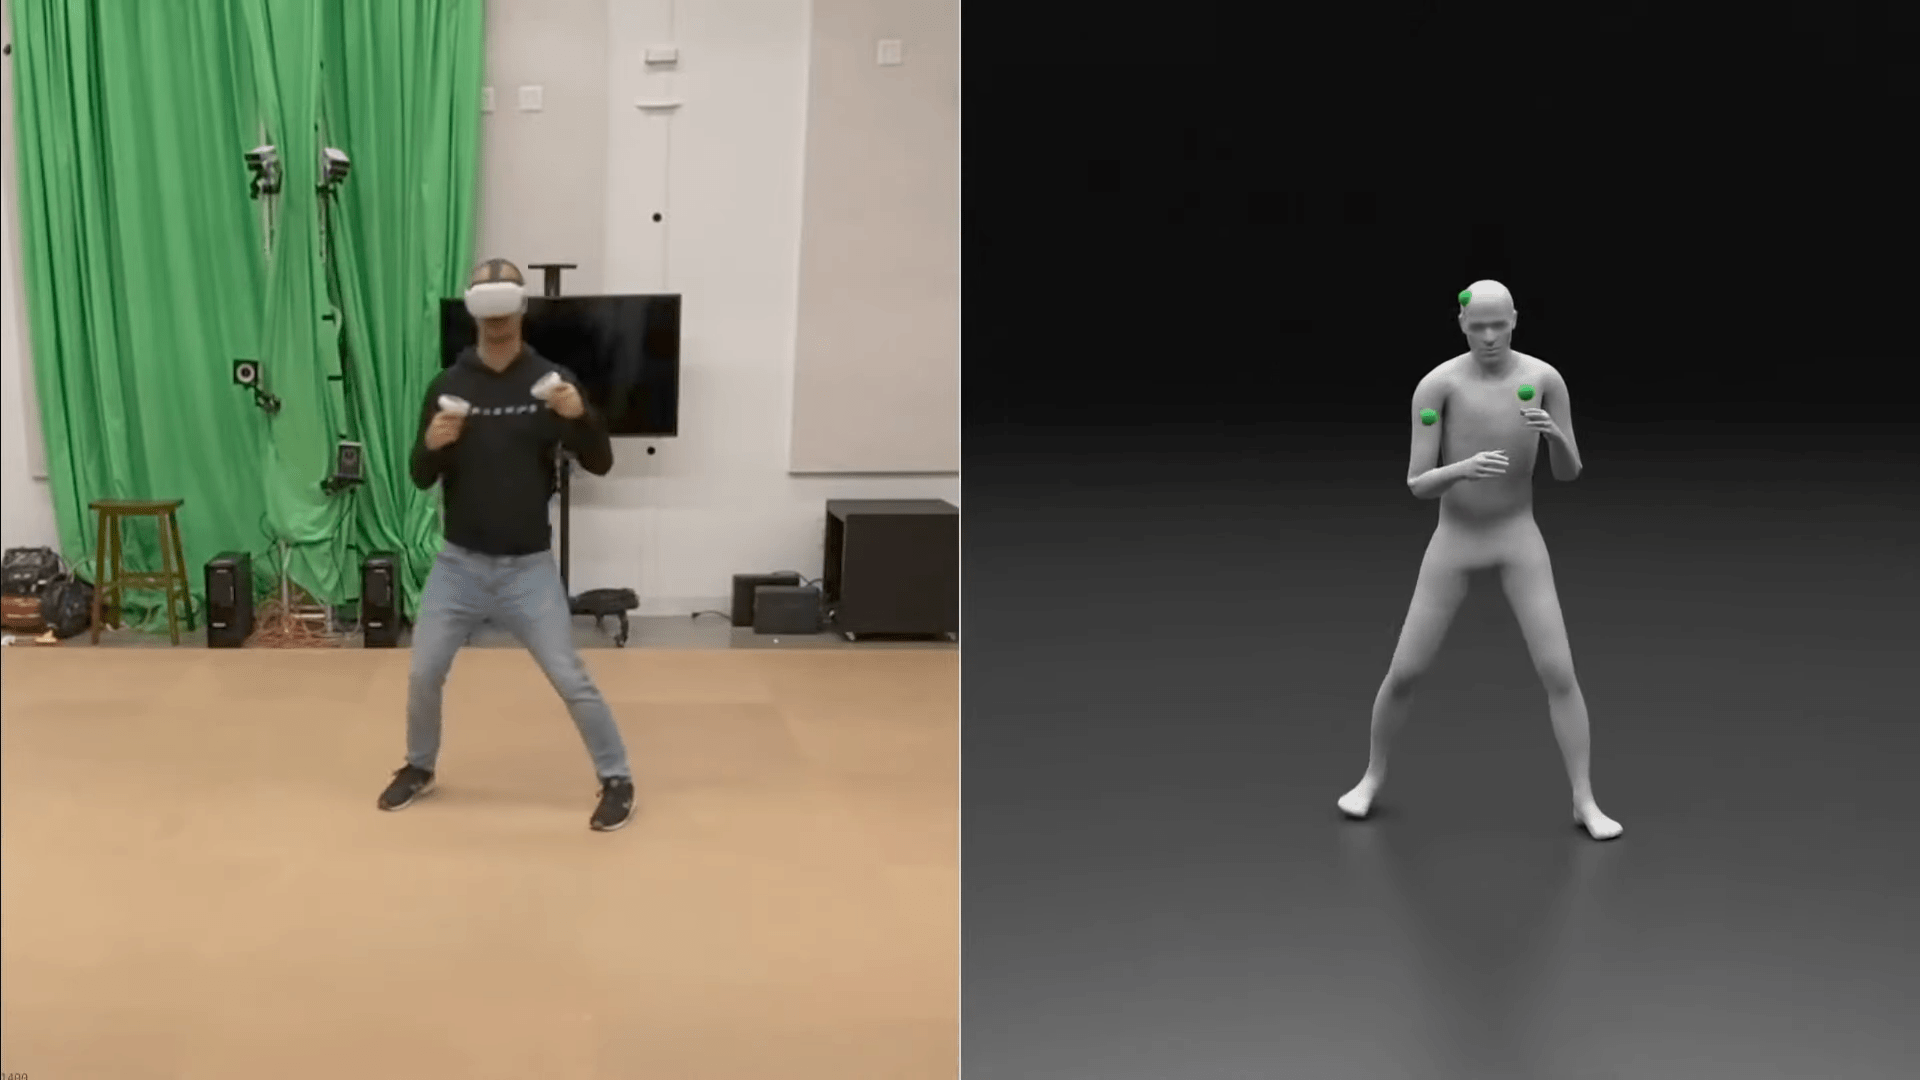 Meta uses AI for full-body tracking based on sparse motion data